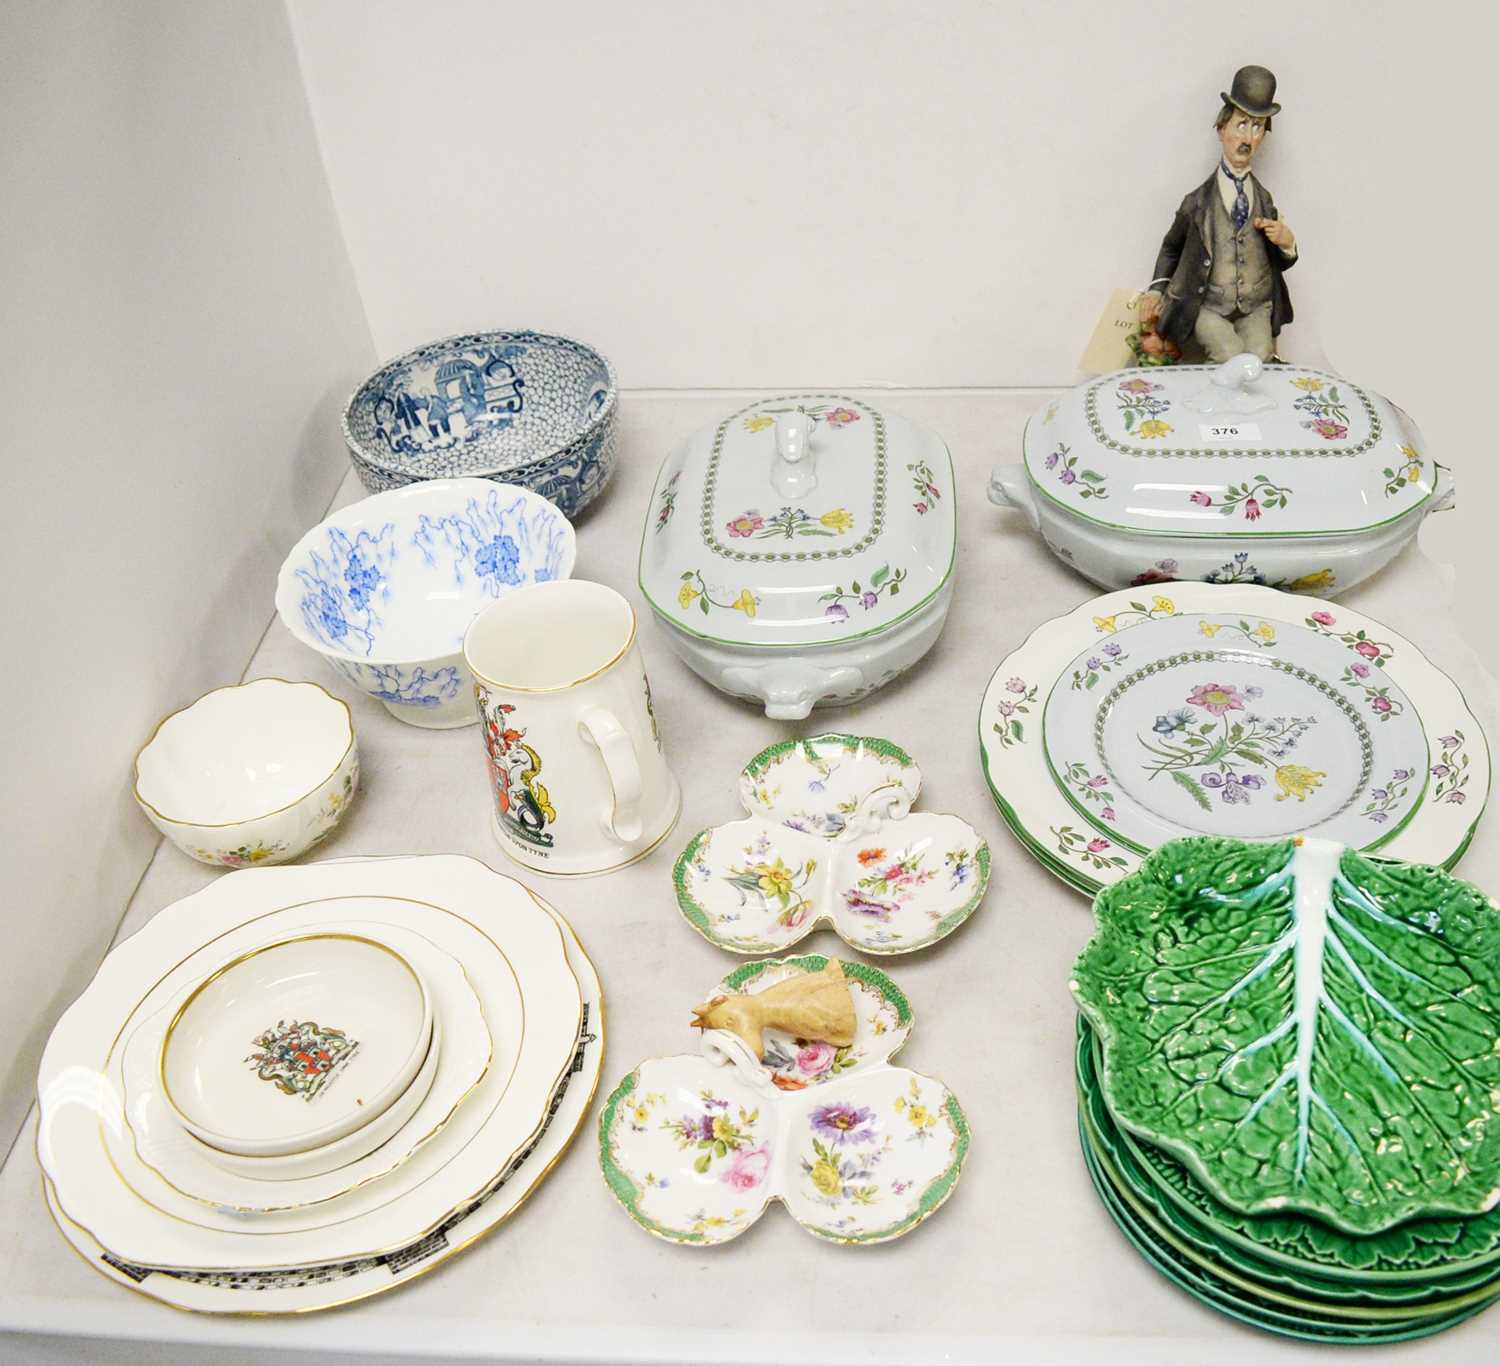 Ceramics including Wedgwood and Royal Doulton - Image 2 of 2